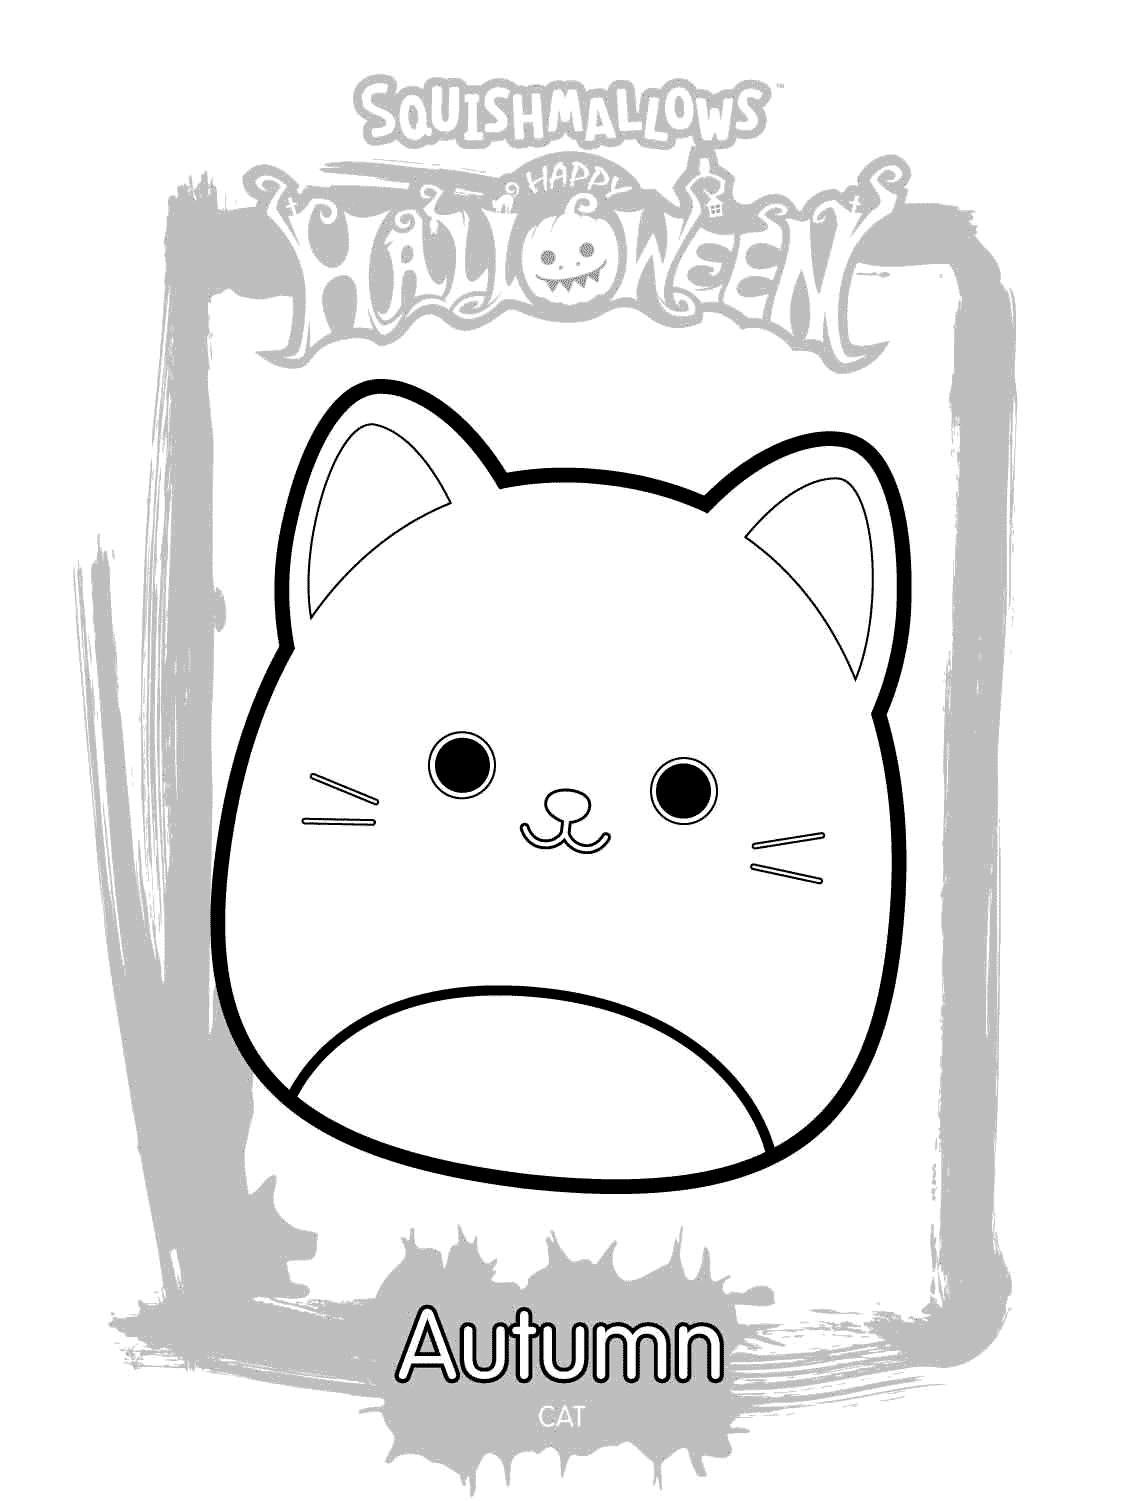 Halloween Cat Squishmallows Coloring Page